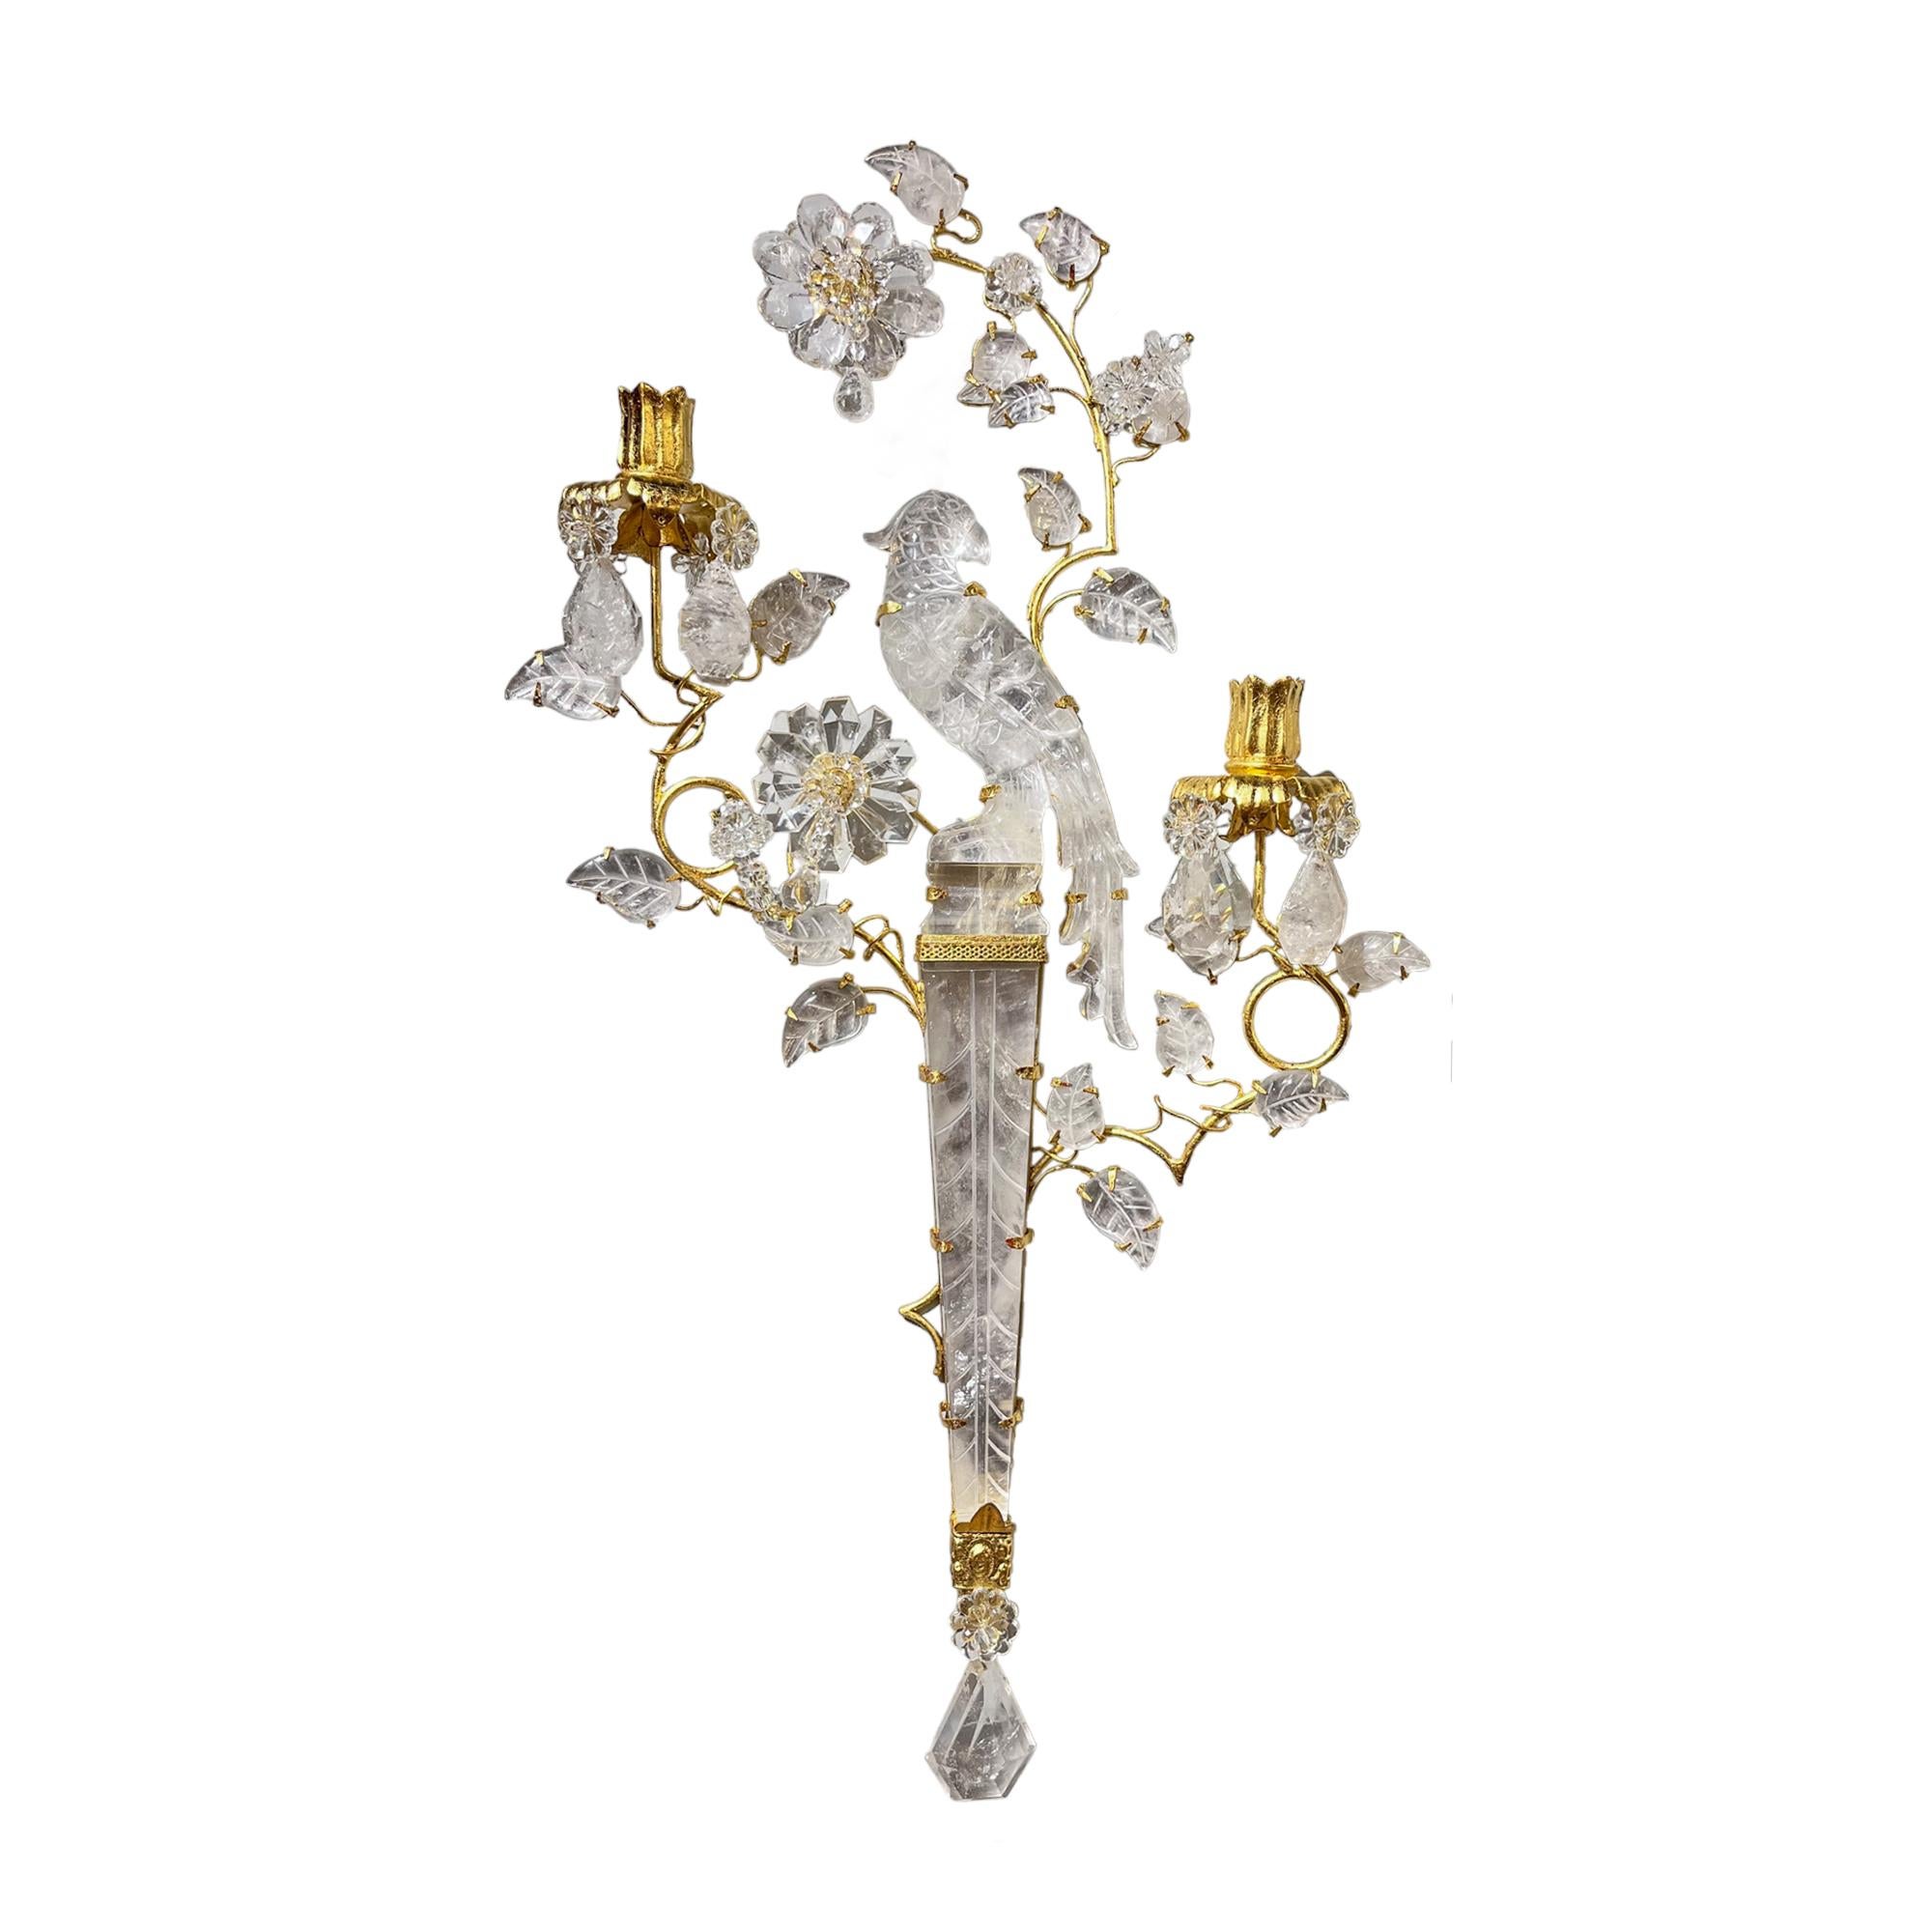 An Exquisite Set of Four French  Two-light Gilt Metal Rock Crystal Wall Sconces after Baguès with carved Parrot & Foliage ornamentation

Dimension: 24 in x 13 1/2 in x 6 in